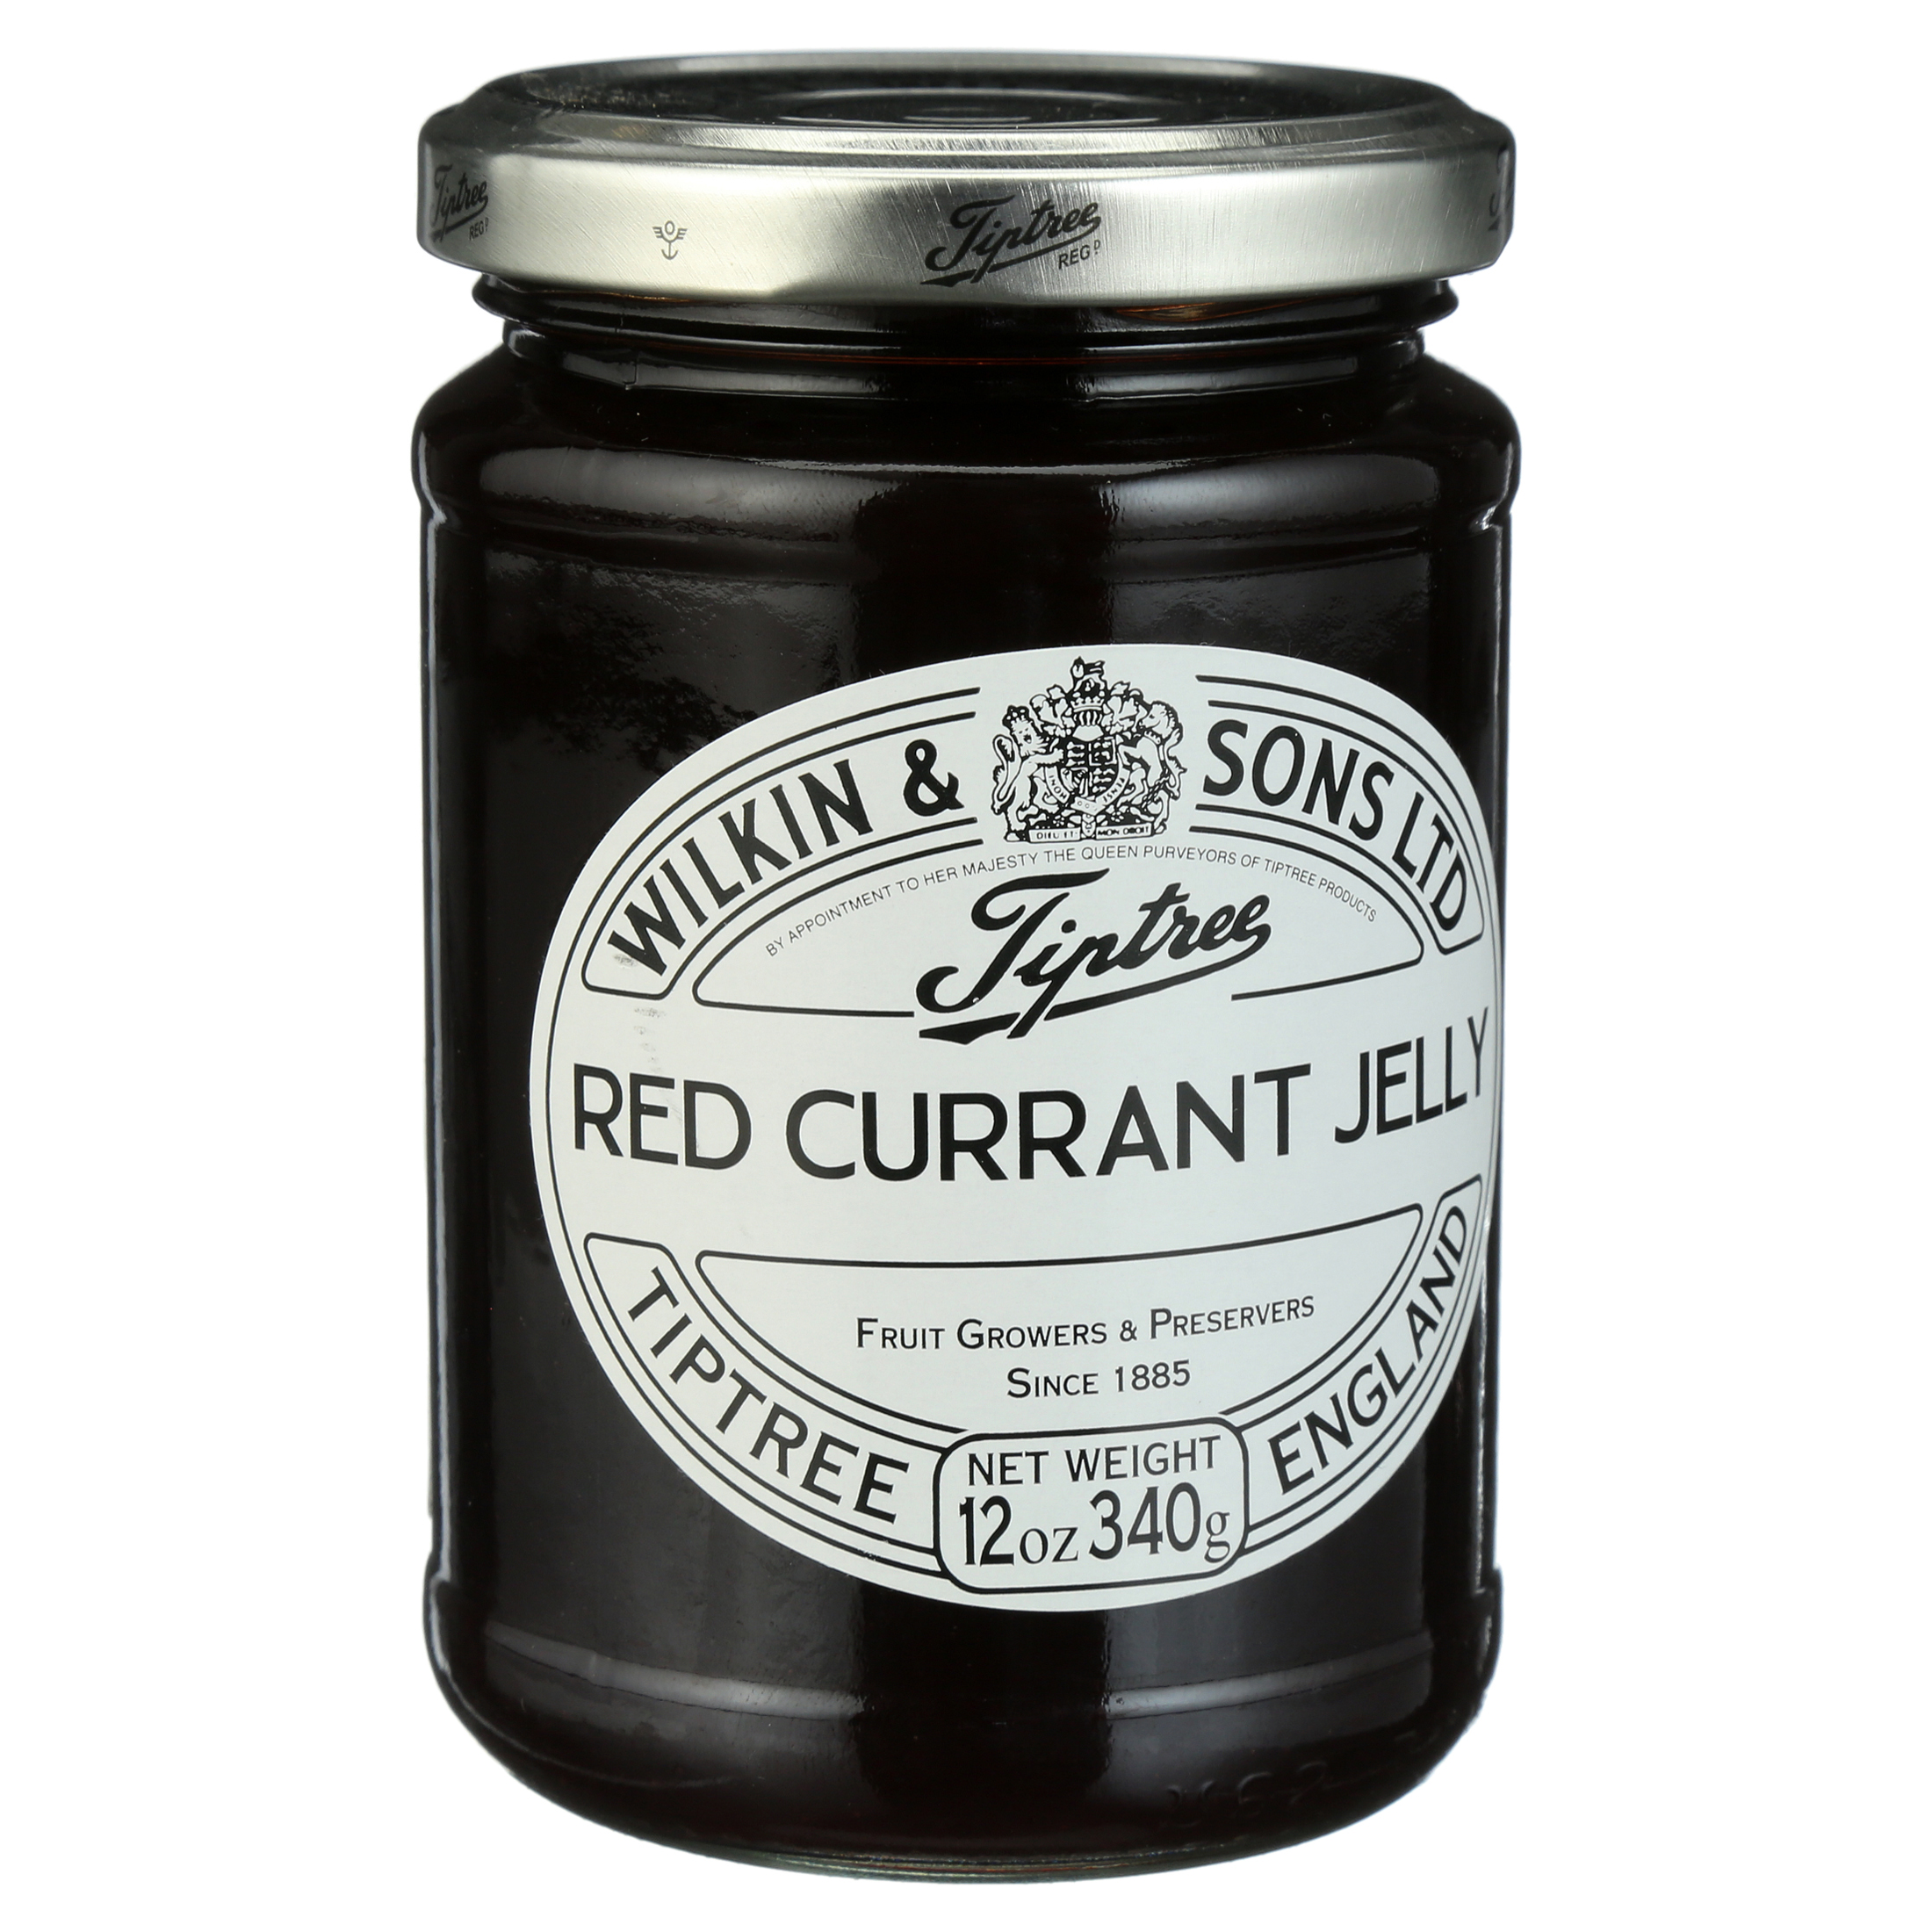 Tiptree Red Currant Jelly, 12 Ounce Jar - image 4 of 8